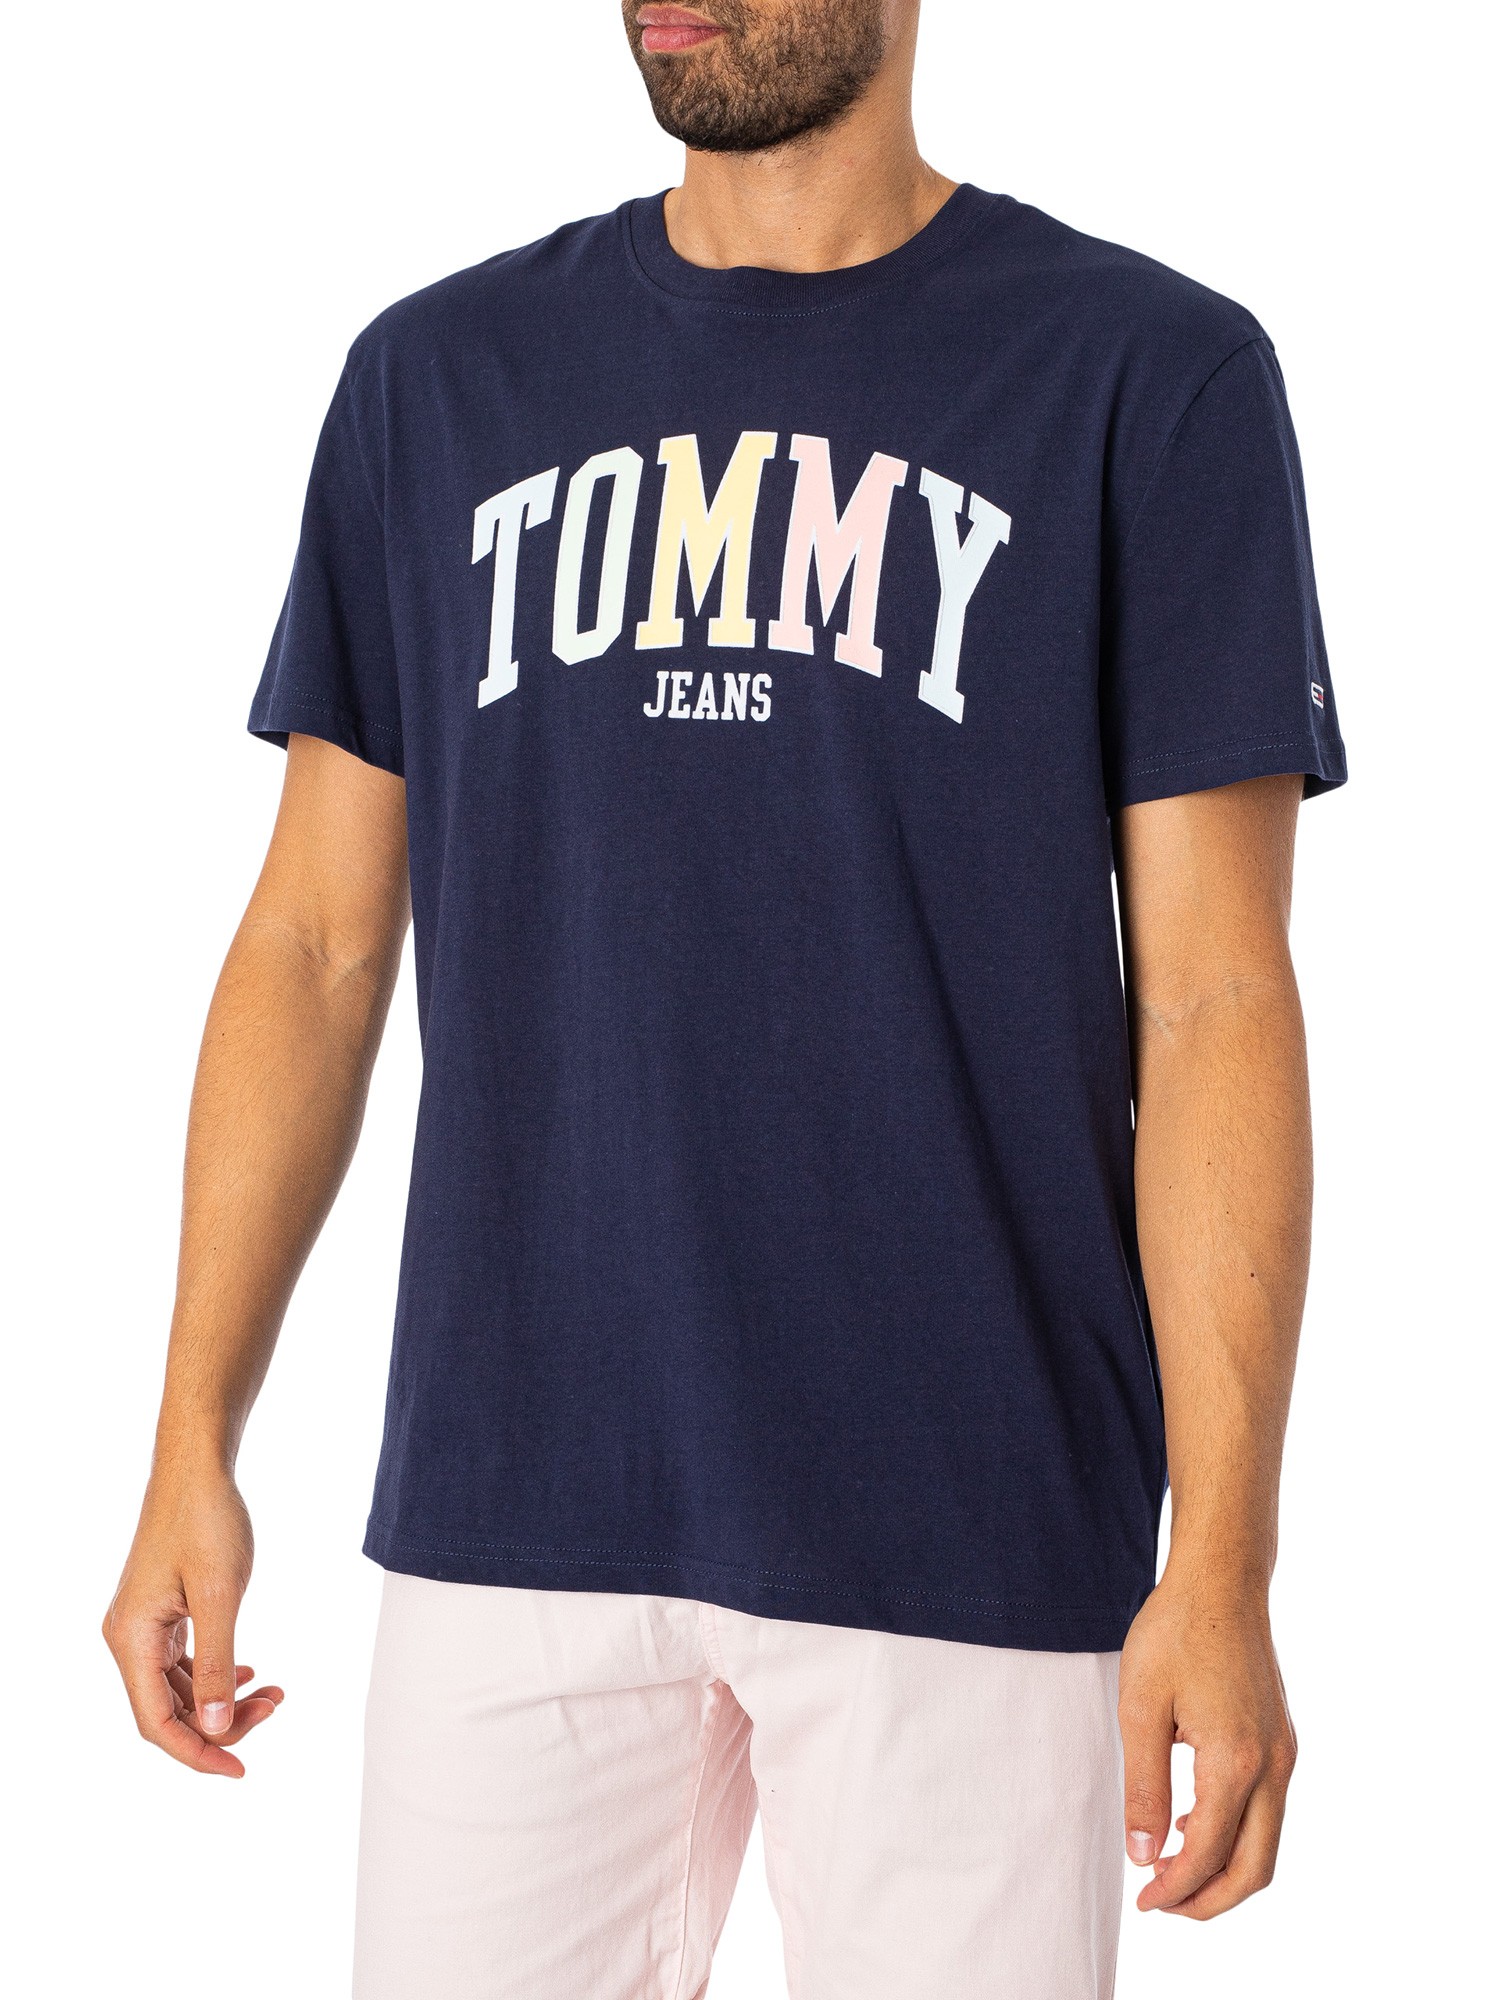 Tommy Jeans College Pop T-Shirt - Twilight Navy | Standout | T-Shirts